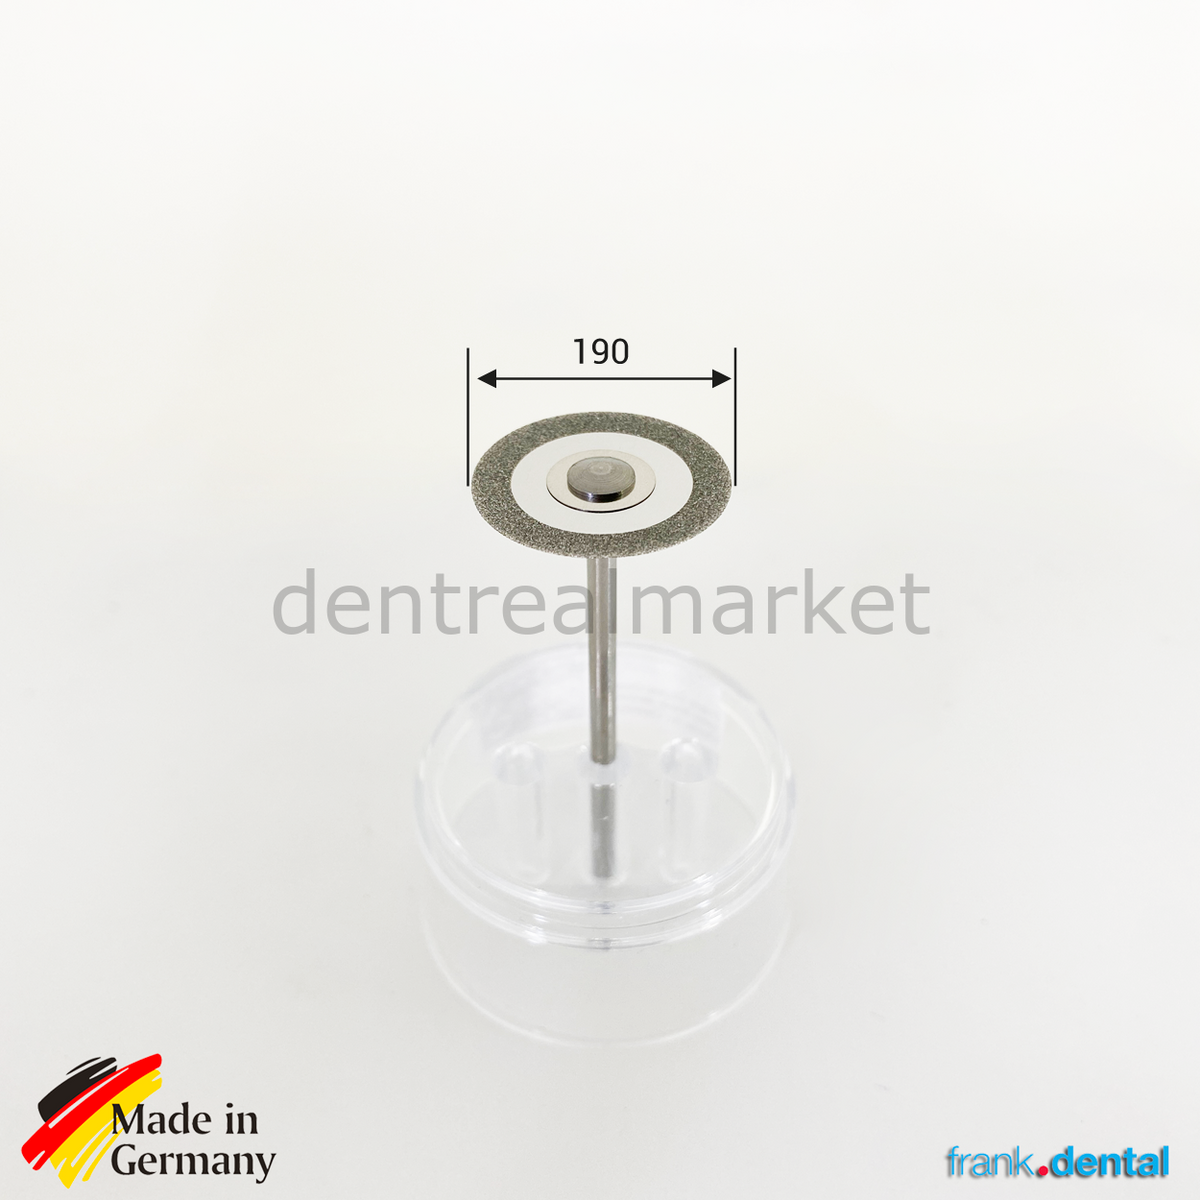 DentrealStore - Frank Dental Ortho Diamond Disc Interface Separe - 355 - 19mm Double Sided Etching